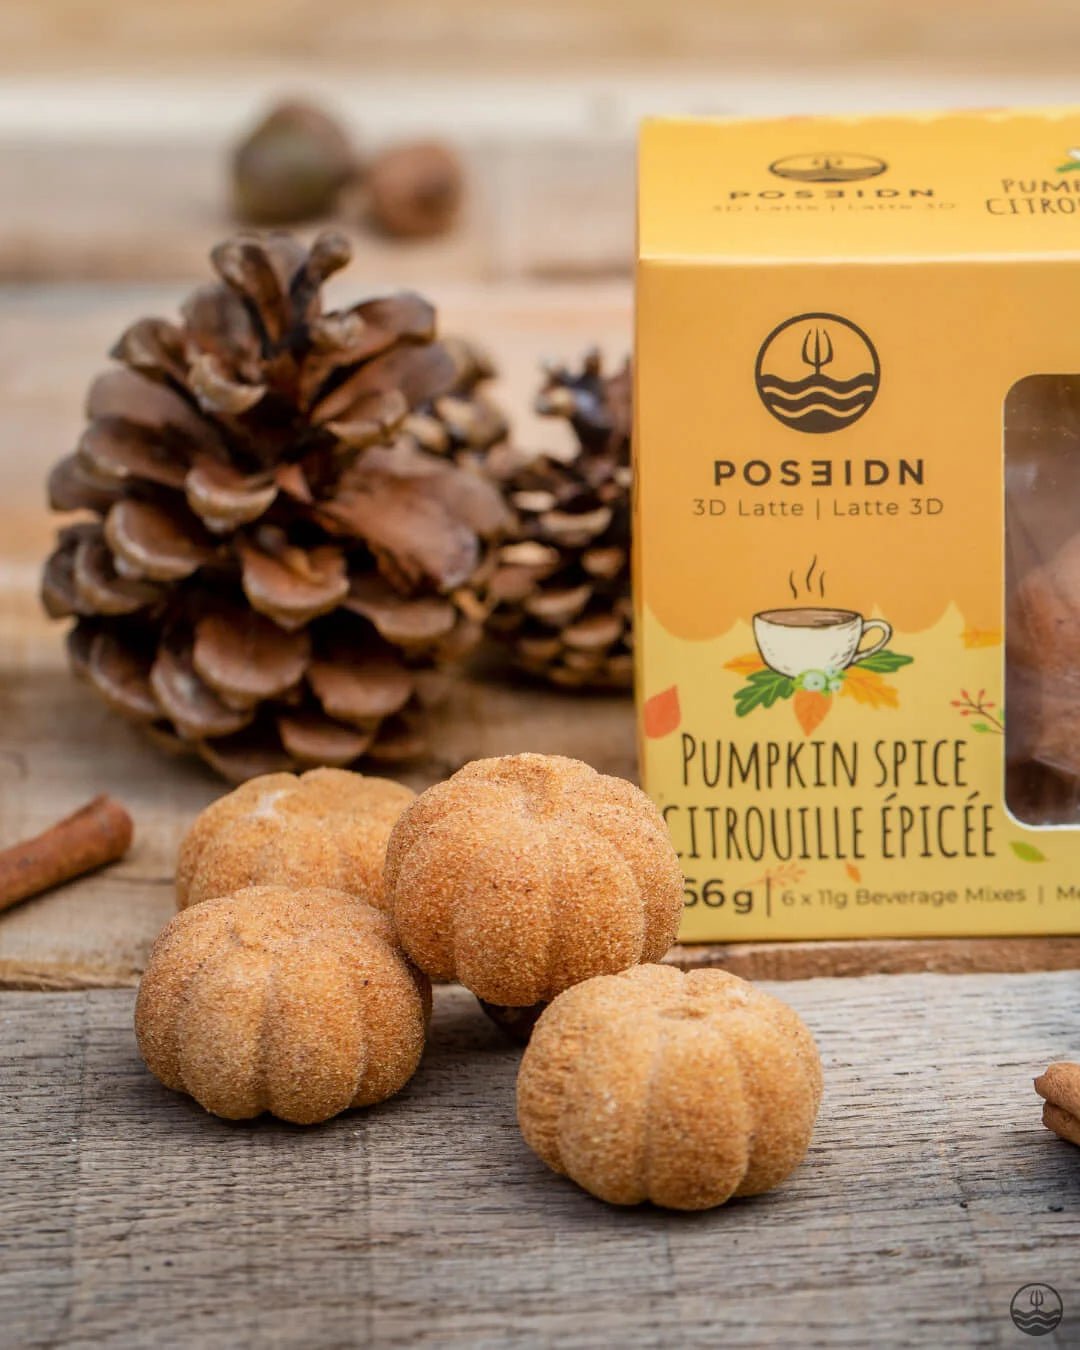 Introducing our Pumpkin Spice Bombs